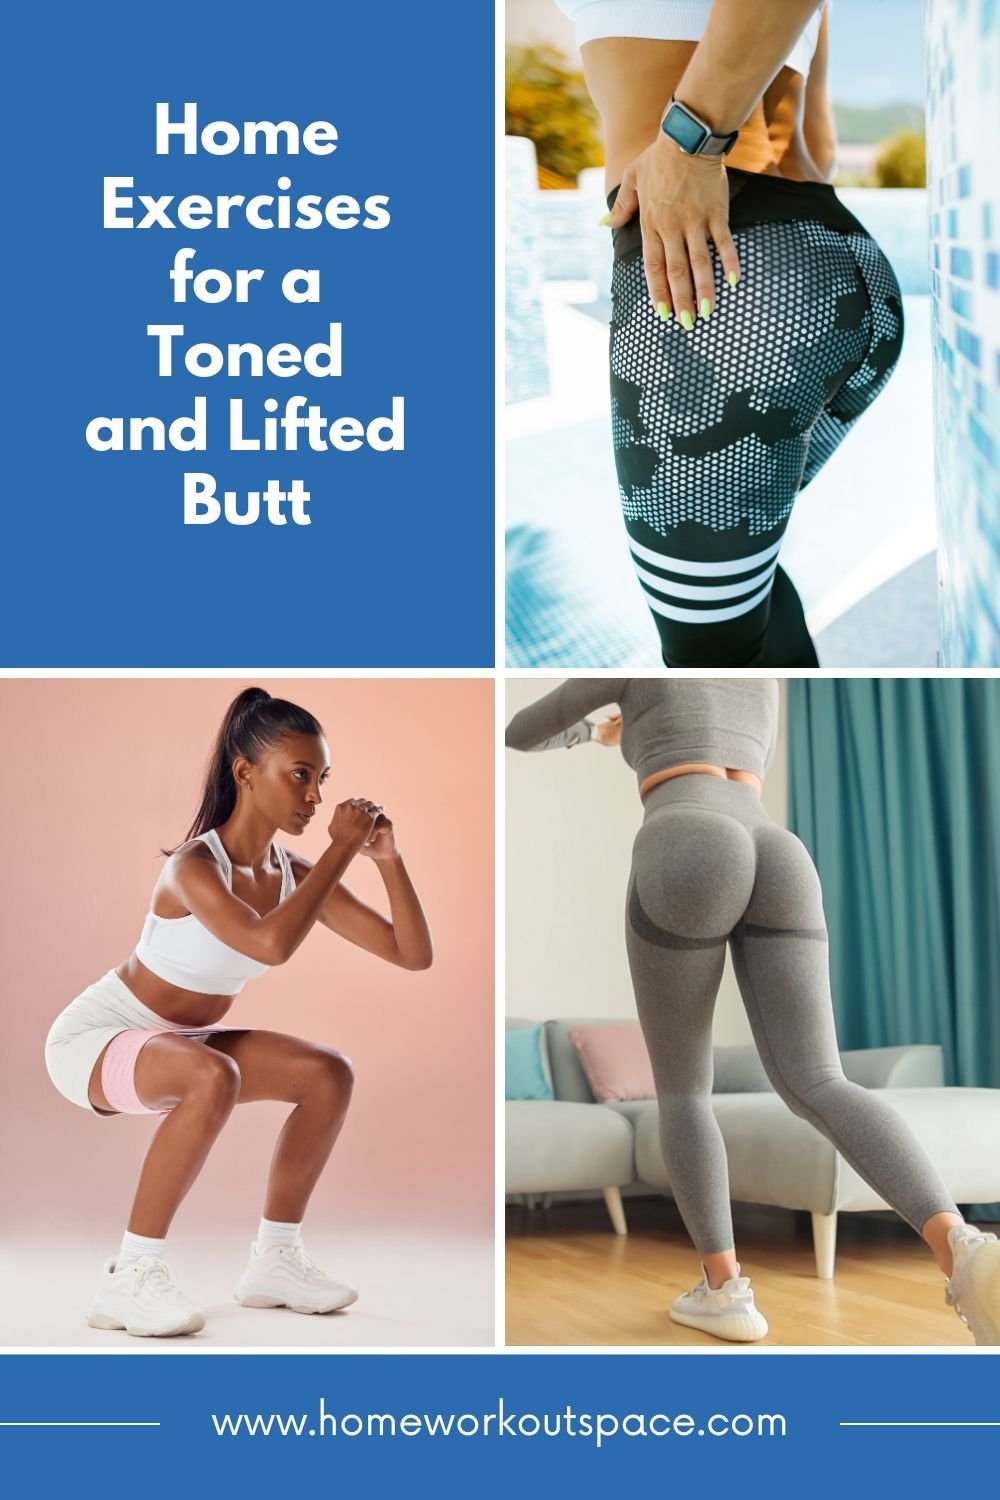 Home Exercises for a Toned and Lifted Butt